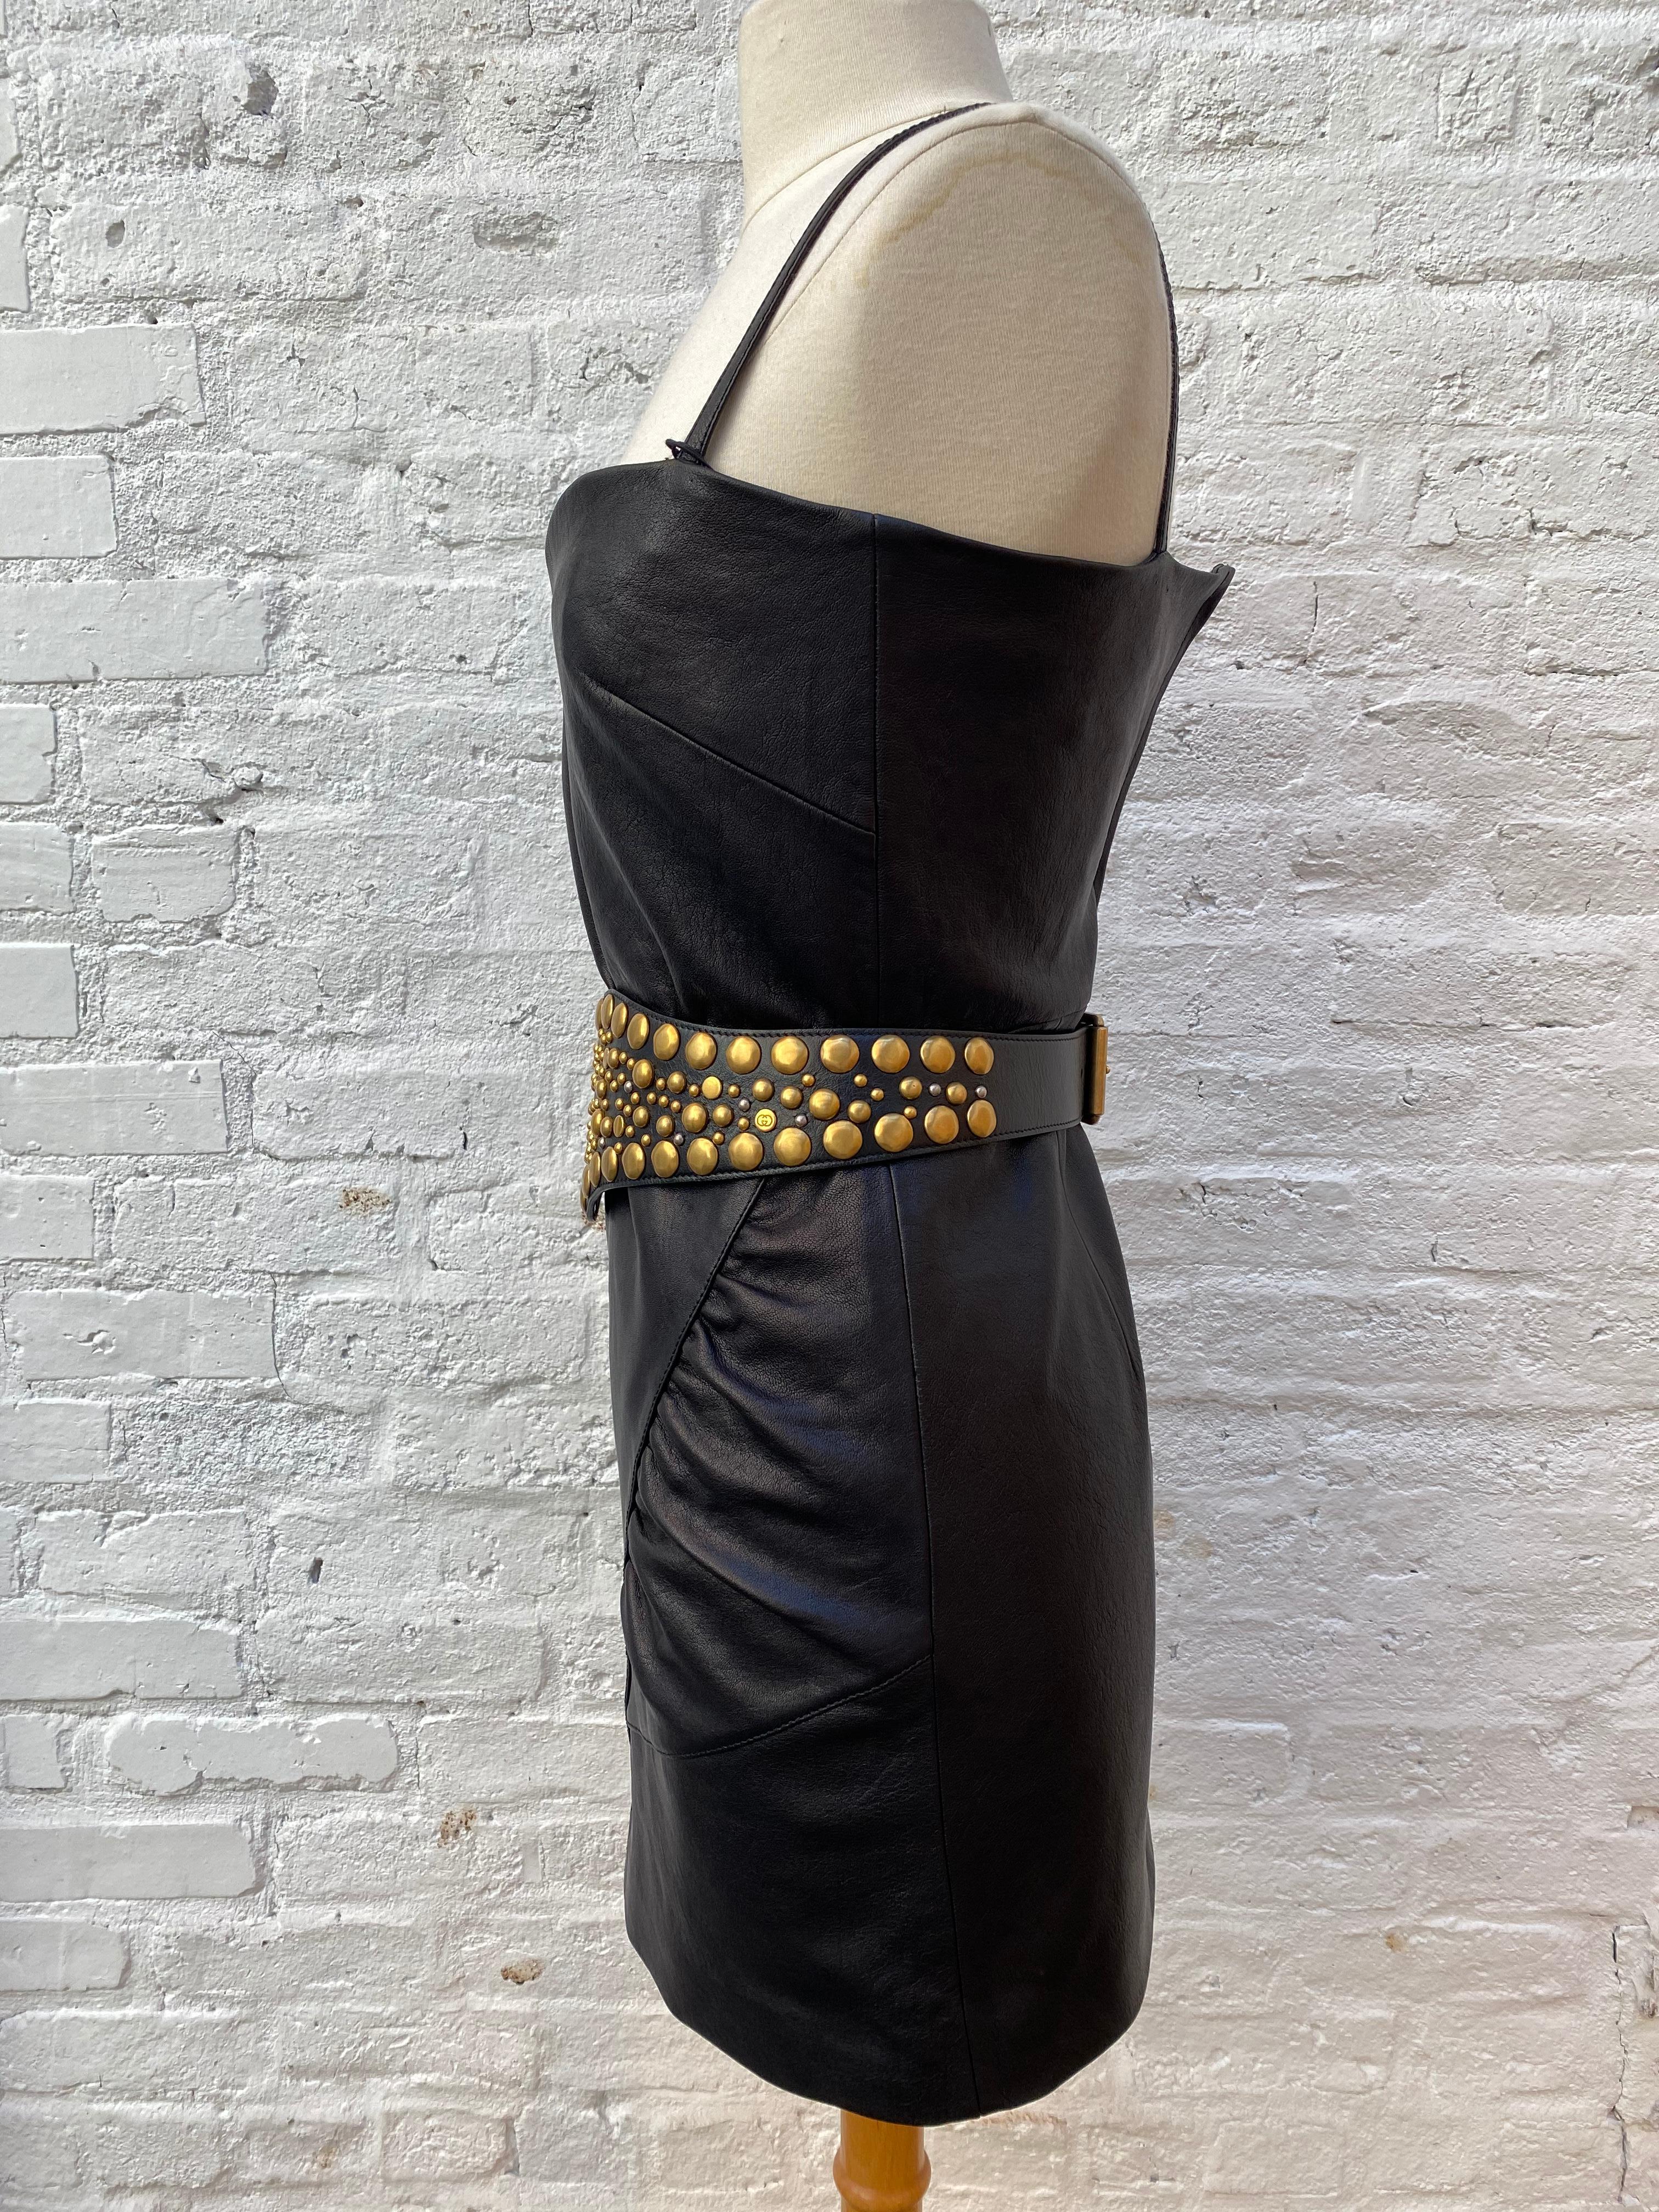 Gucci Black Leather Dress with Studded Calfskin Belt. New condition with original tags. Never worn. Can be worn with belt or without. Guaranteed authentic. 

Measurements
Bust: 32